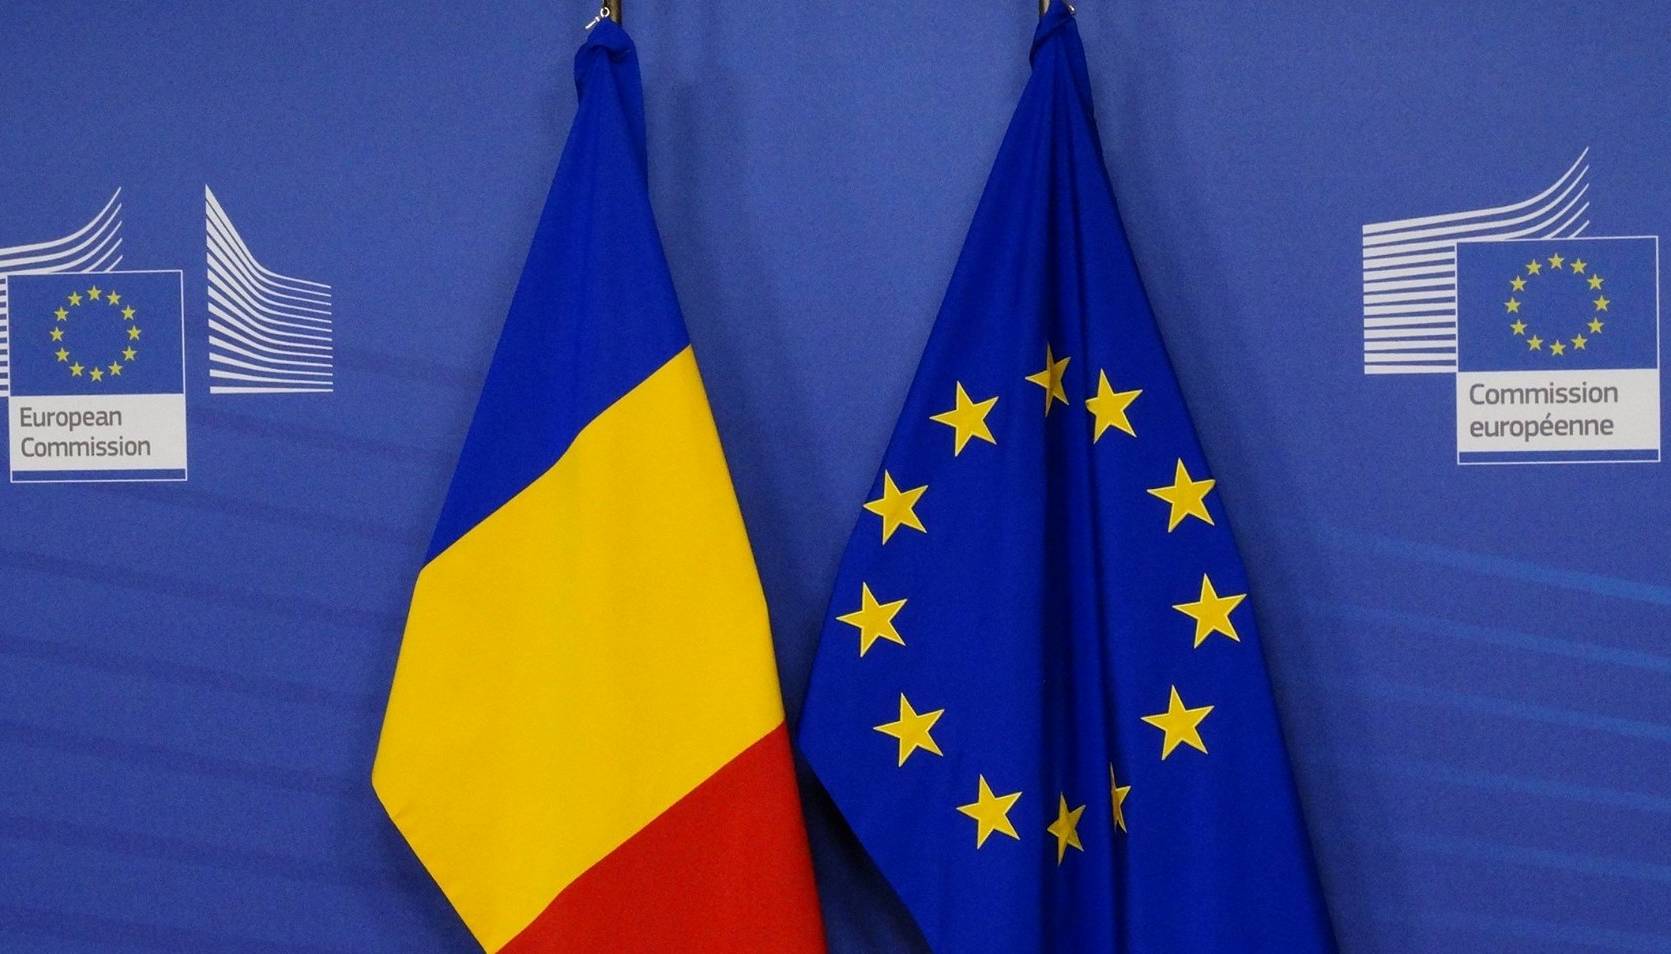 The European Commission Proposed 7 New Sanctions Against Russia